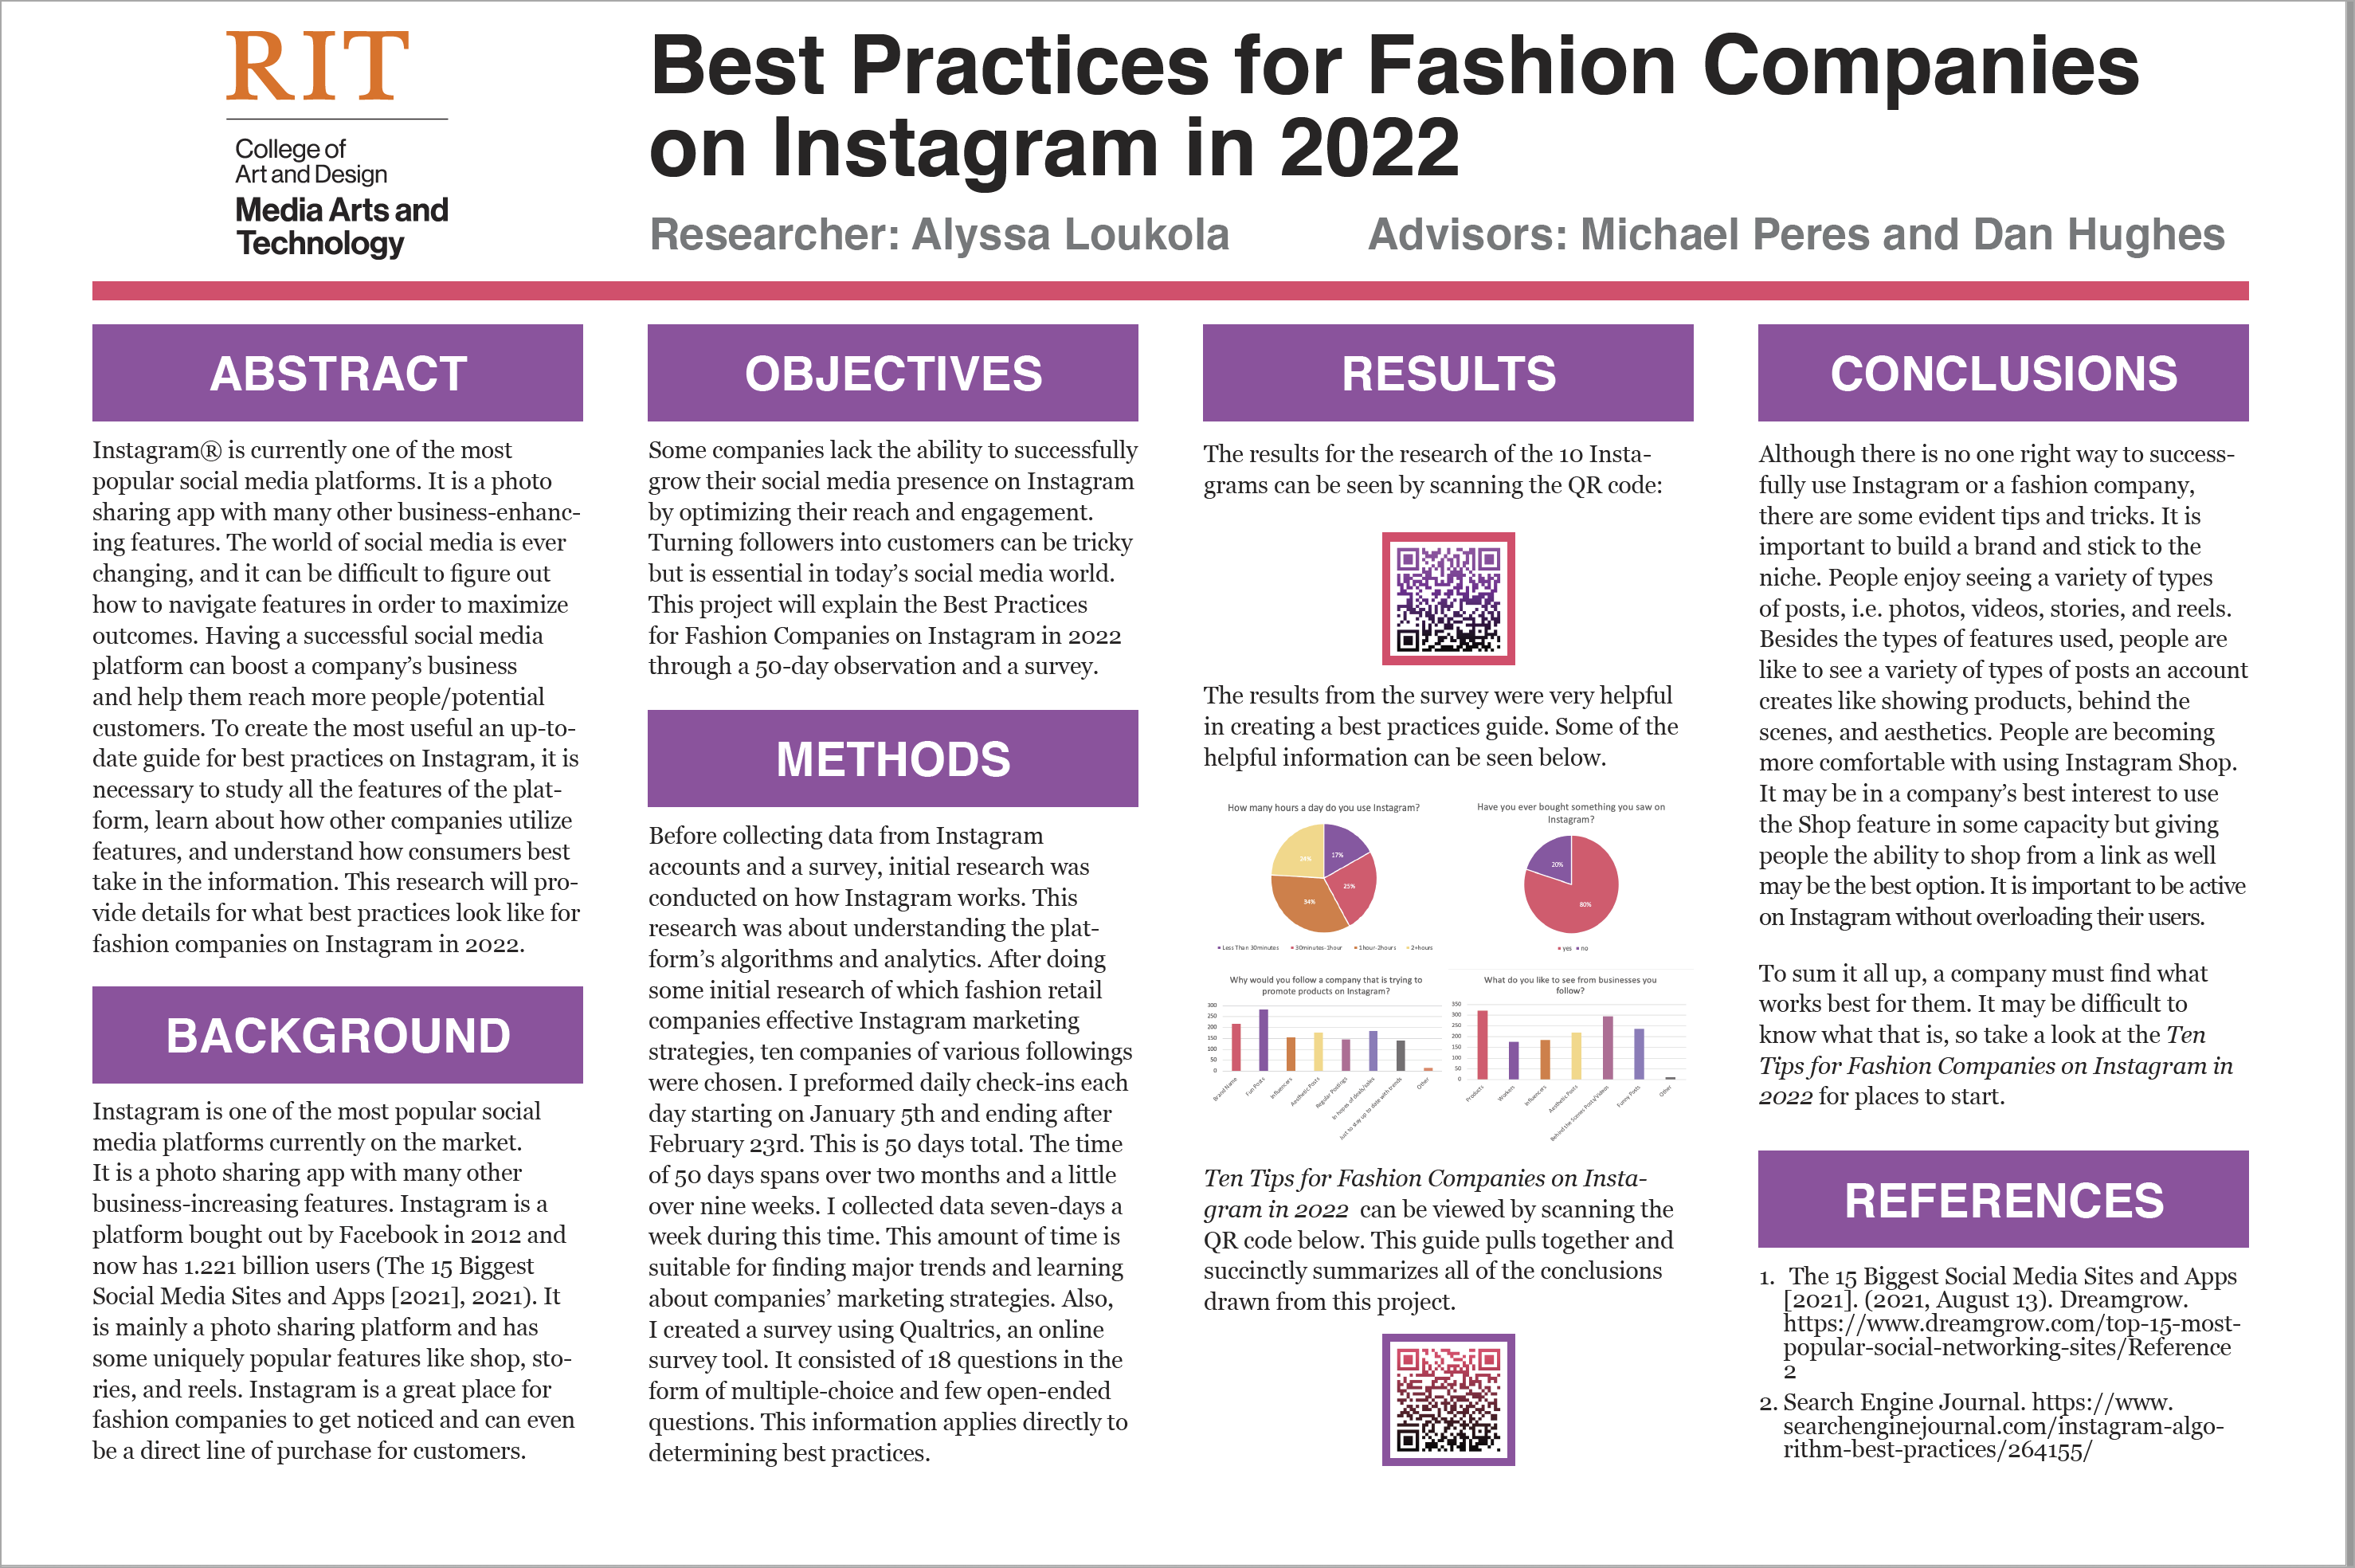 A poster highlighting research on best practices for fashion companies on Instagram in 2022.